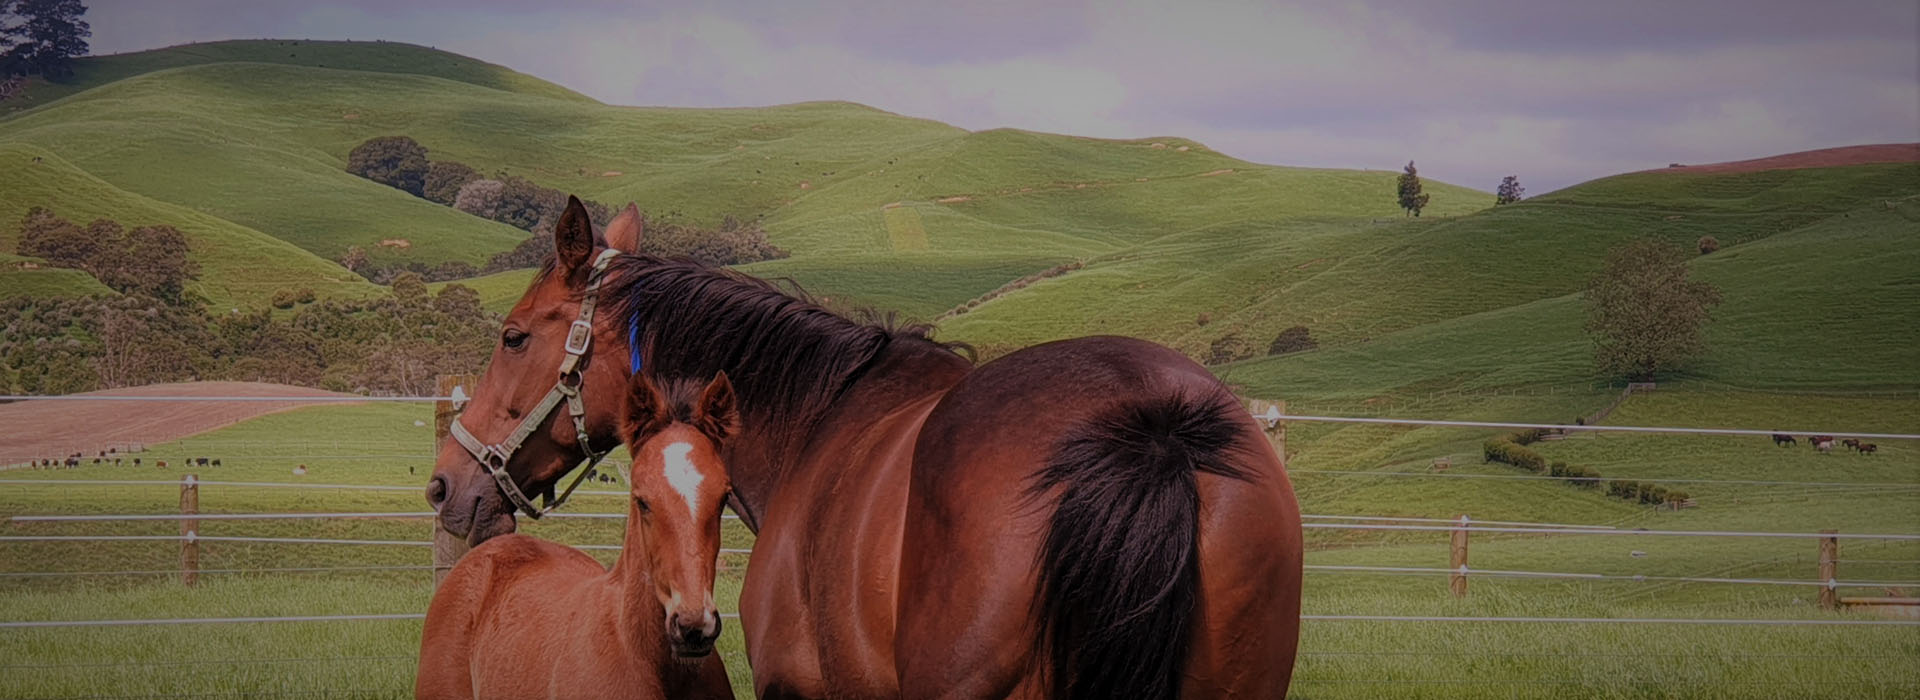 Mare and Foal - EquiBreed New Zealand